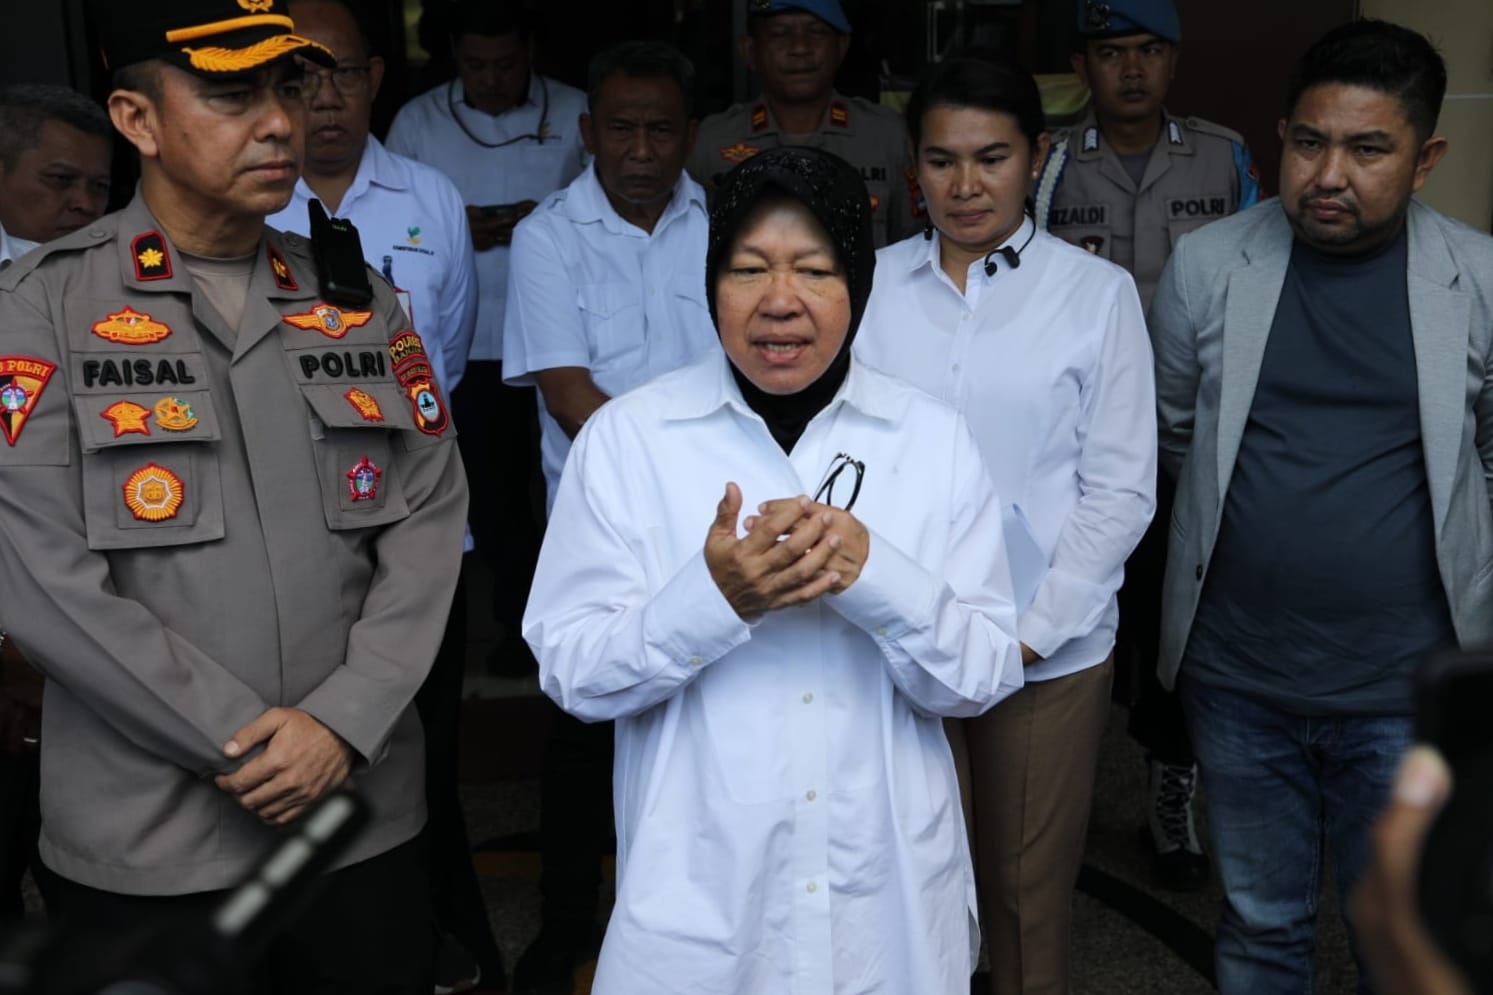 Accompanying Rape Victims in Banjar, Social Affairs Minister Hopes for Maximum Punishment for Perpetrators